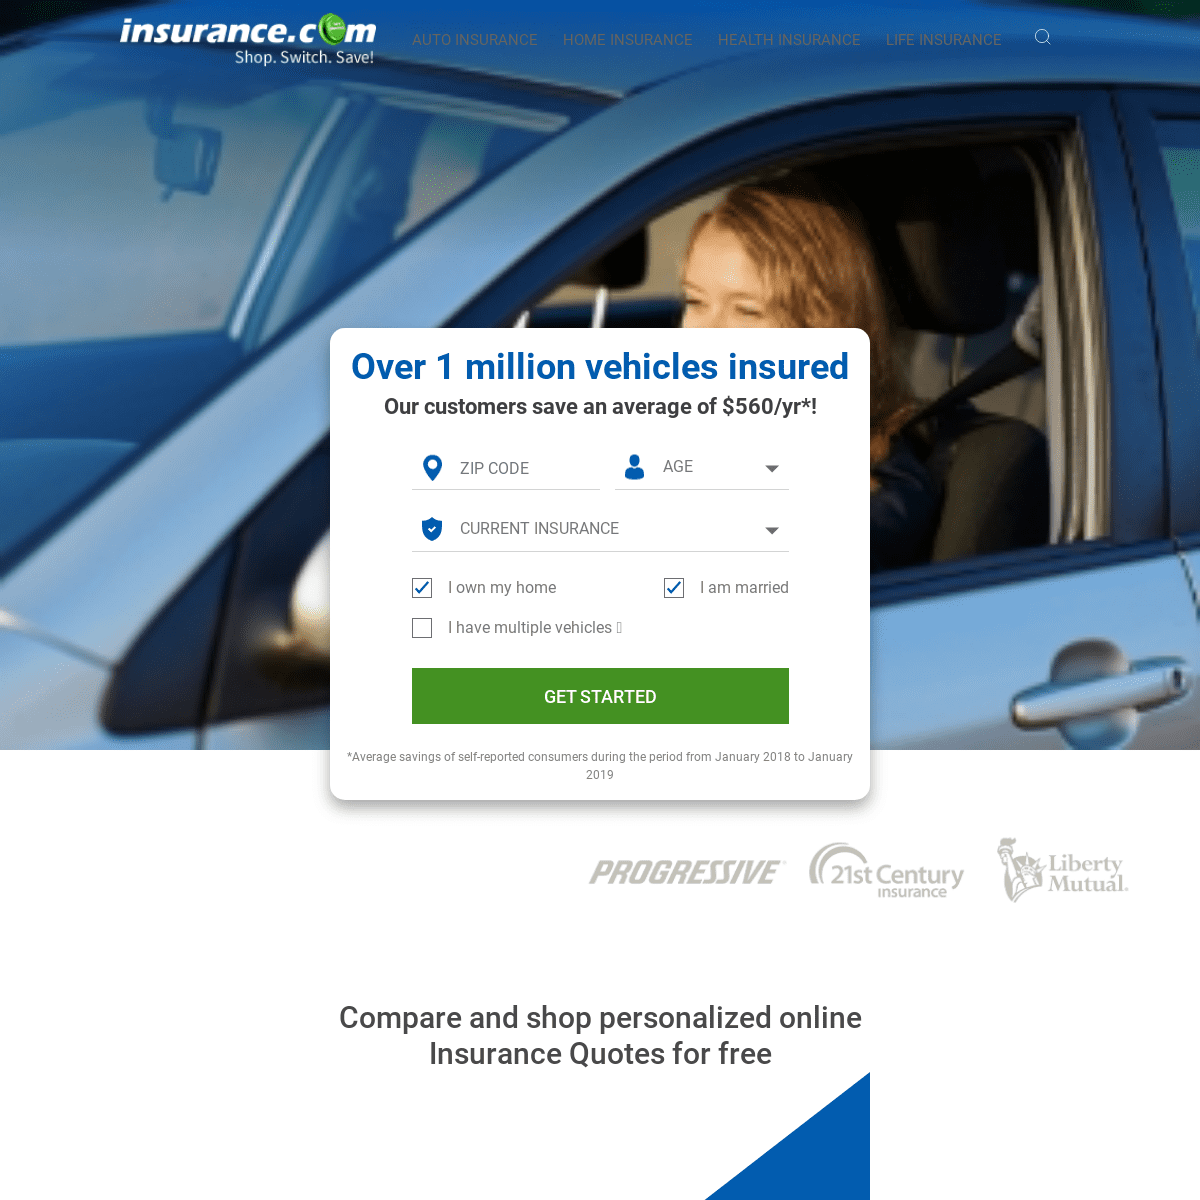 A complete backup of https://insurance.com